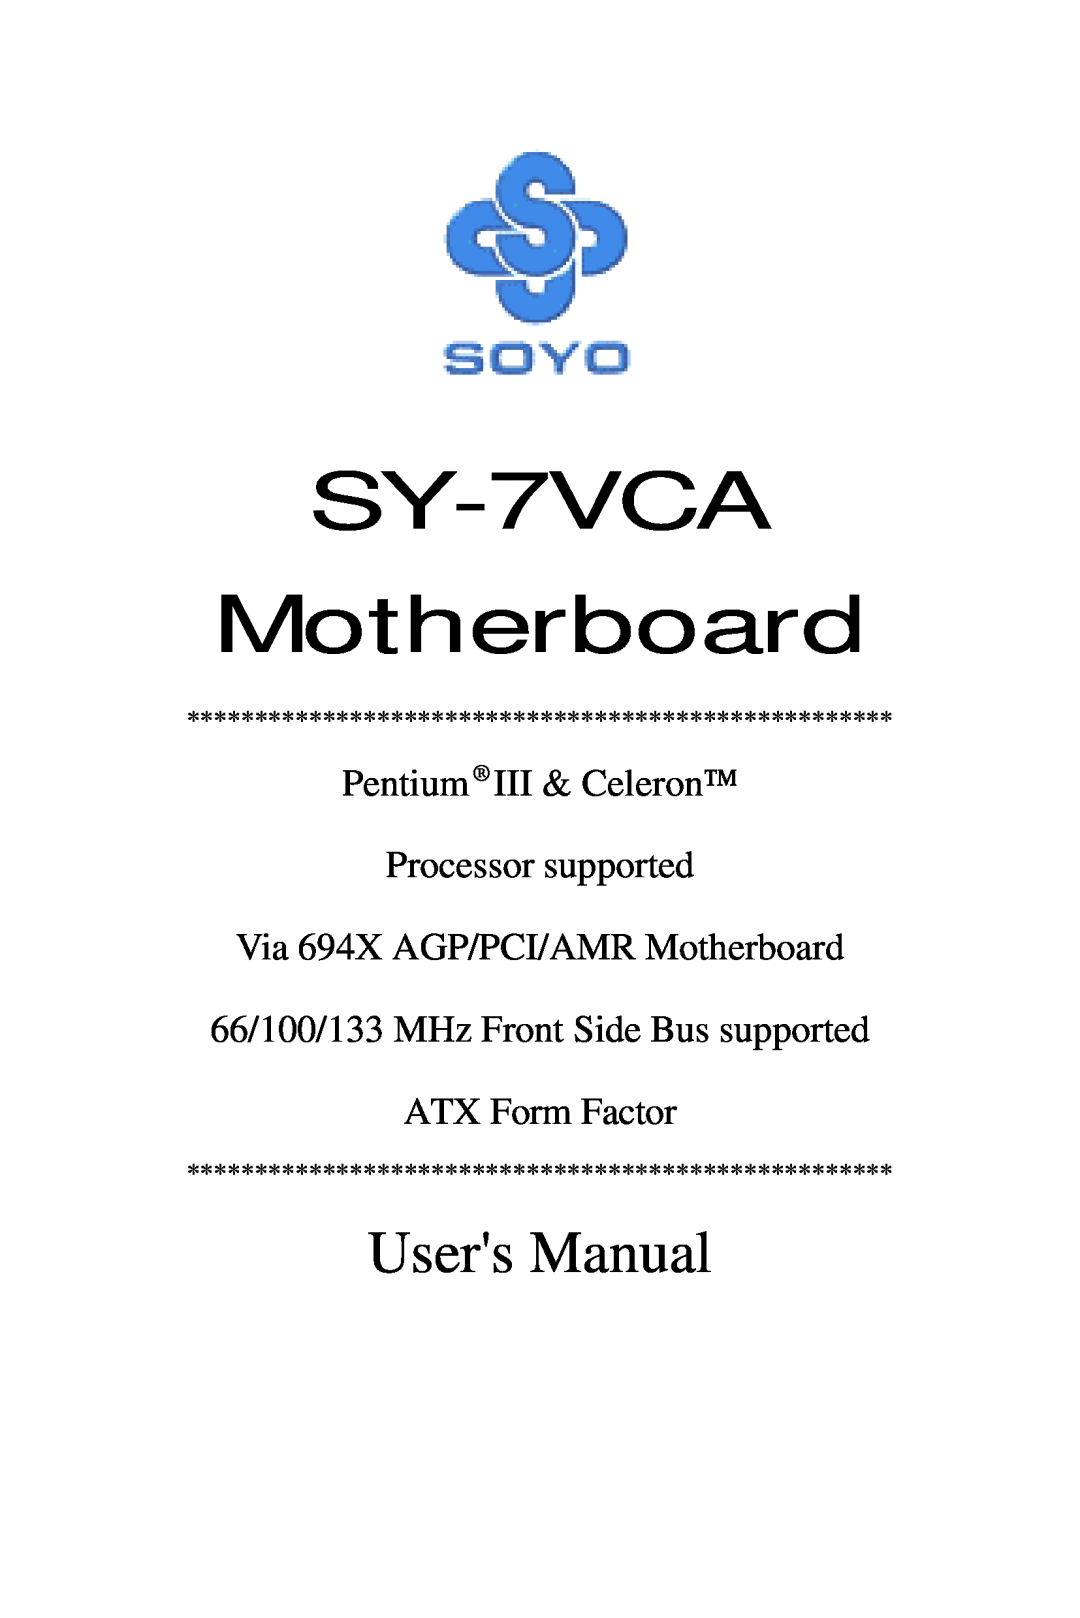 SOYO SY-7VCA quick start Introduction, Hardware, Installation, Quick BIOS, Setup, The SOYO CD, Quick Start Guide 